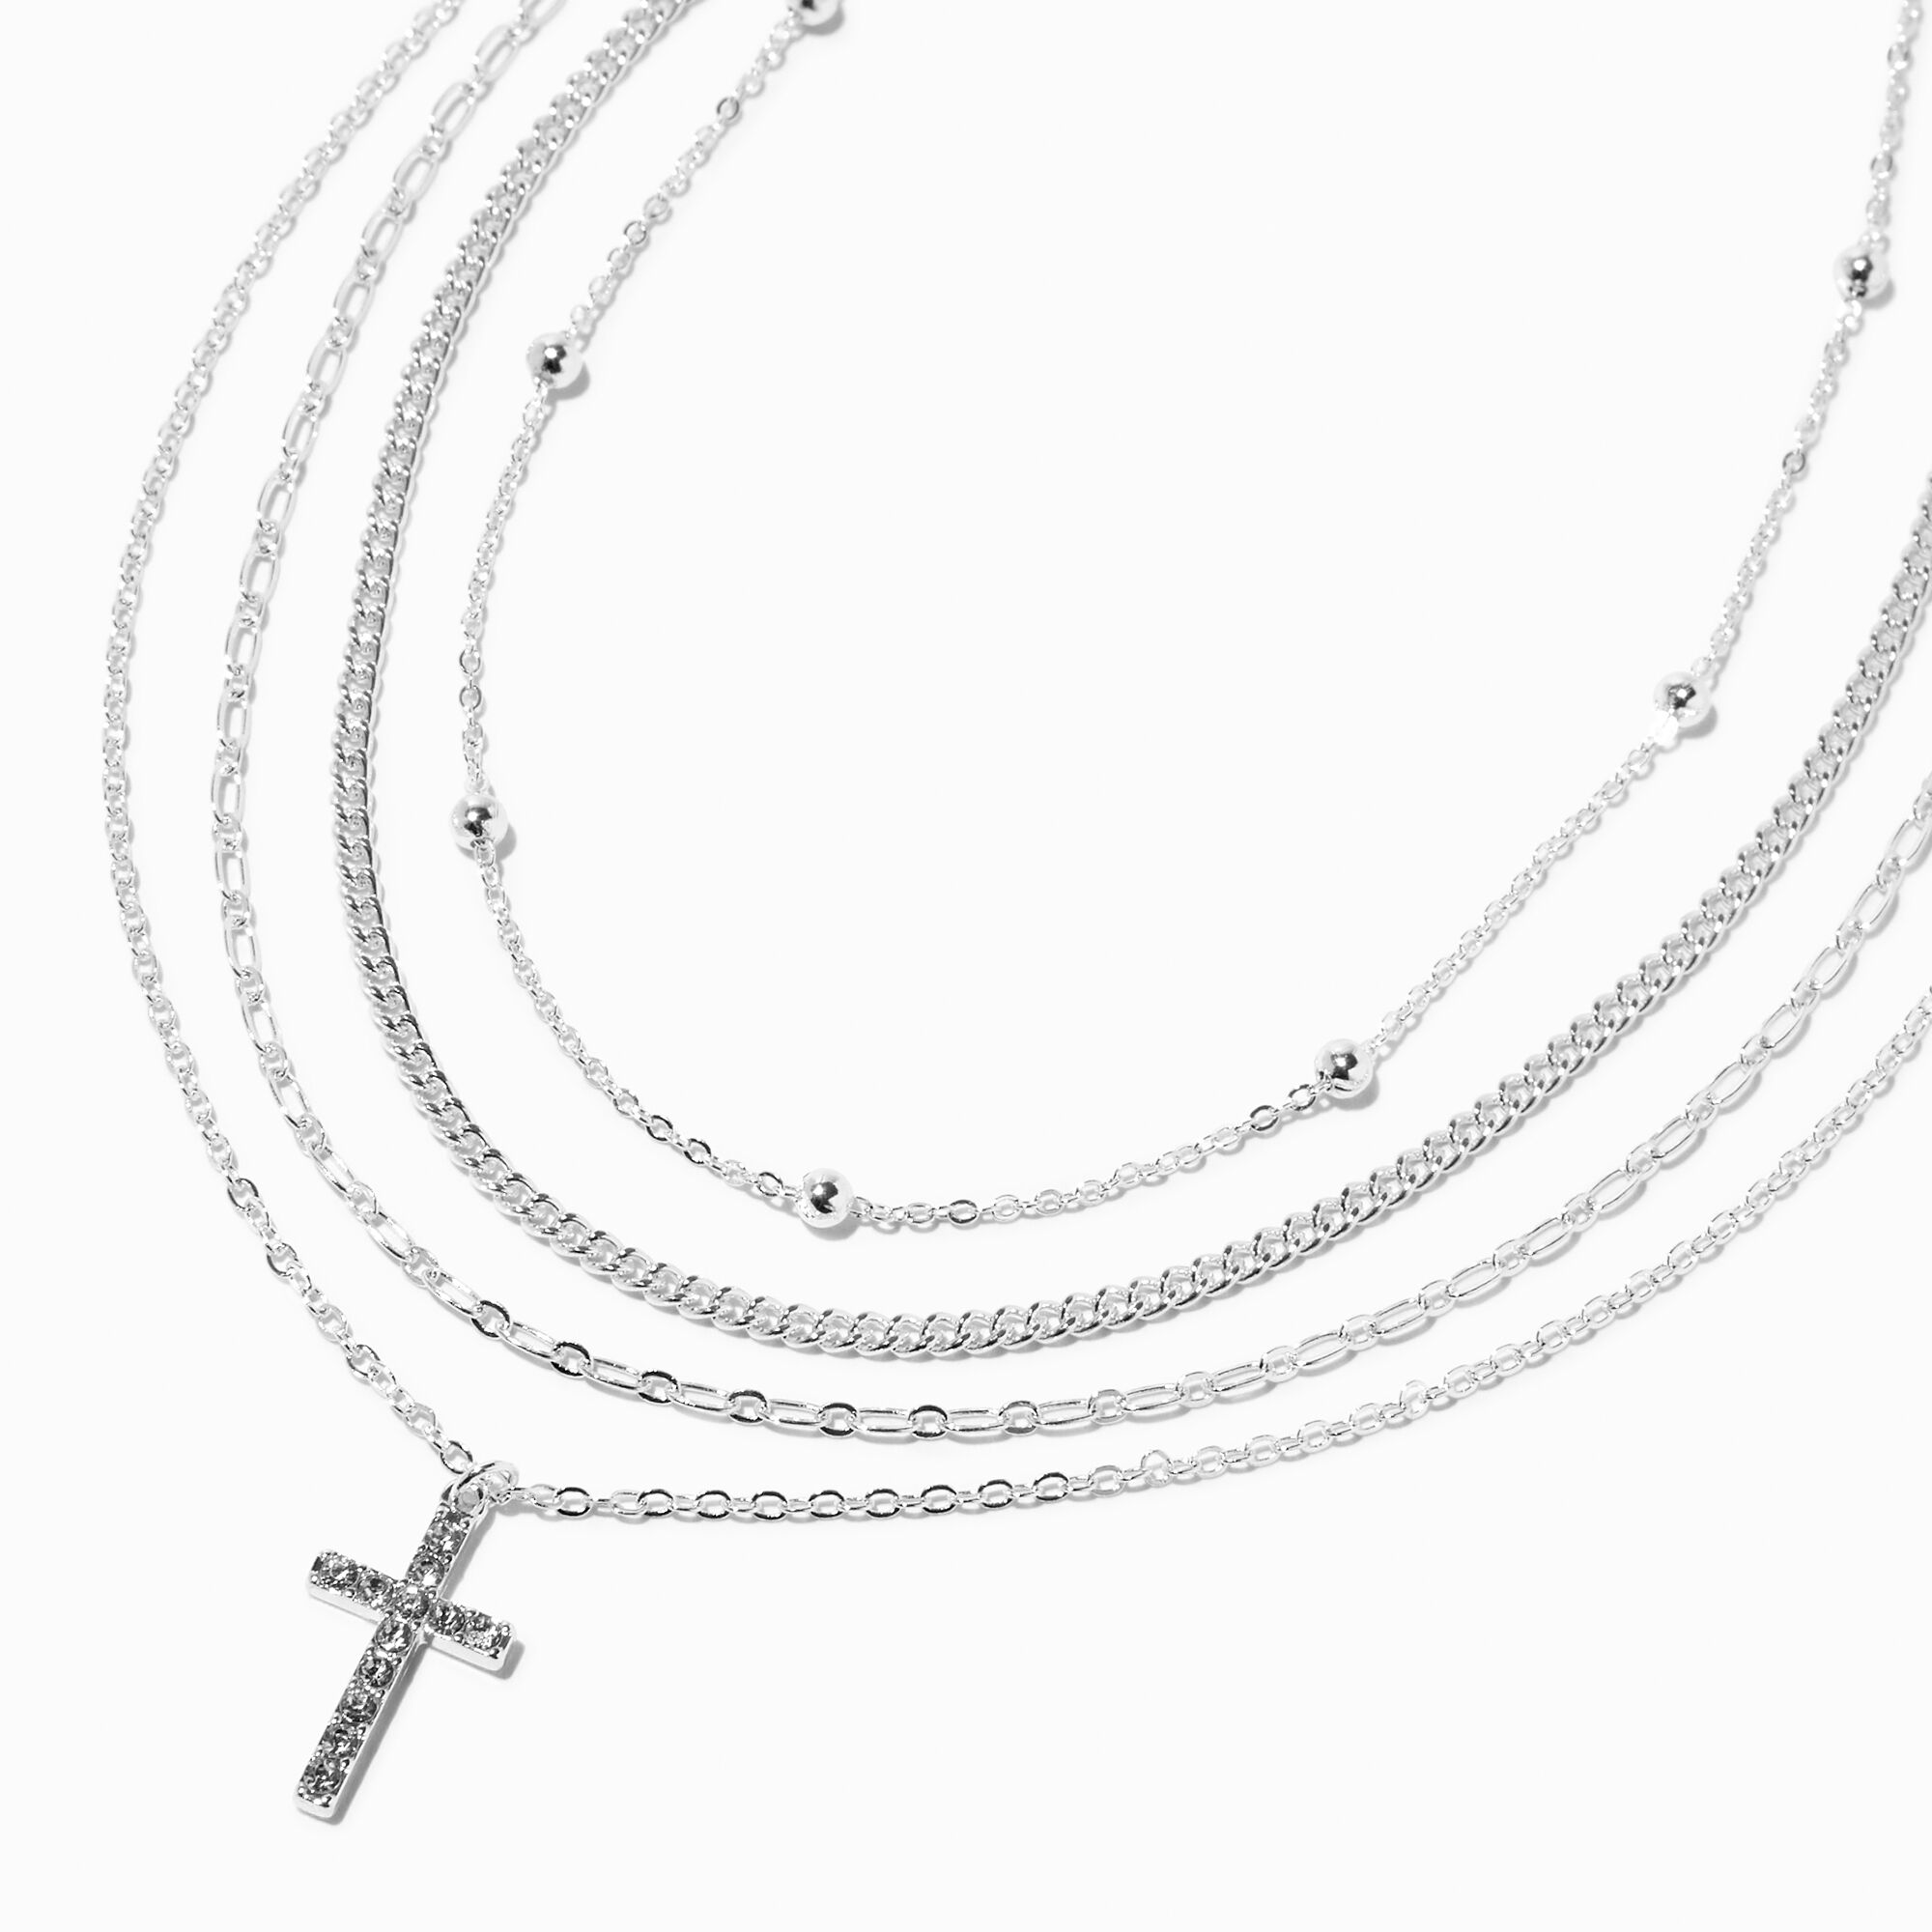 View Claires Tone Cross Crystal Multi Strand Necklace Silver information